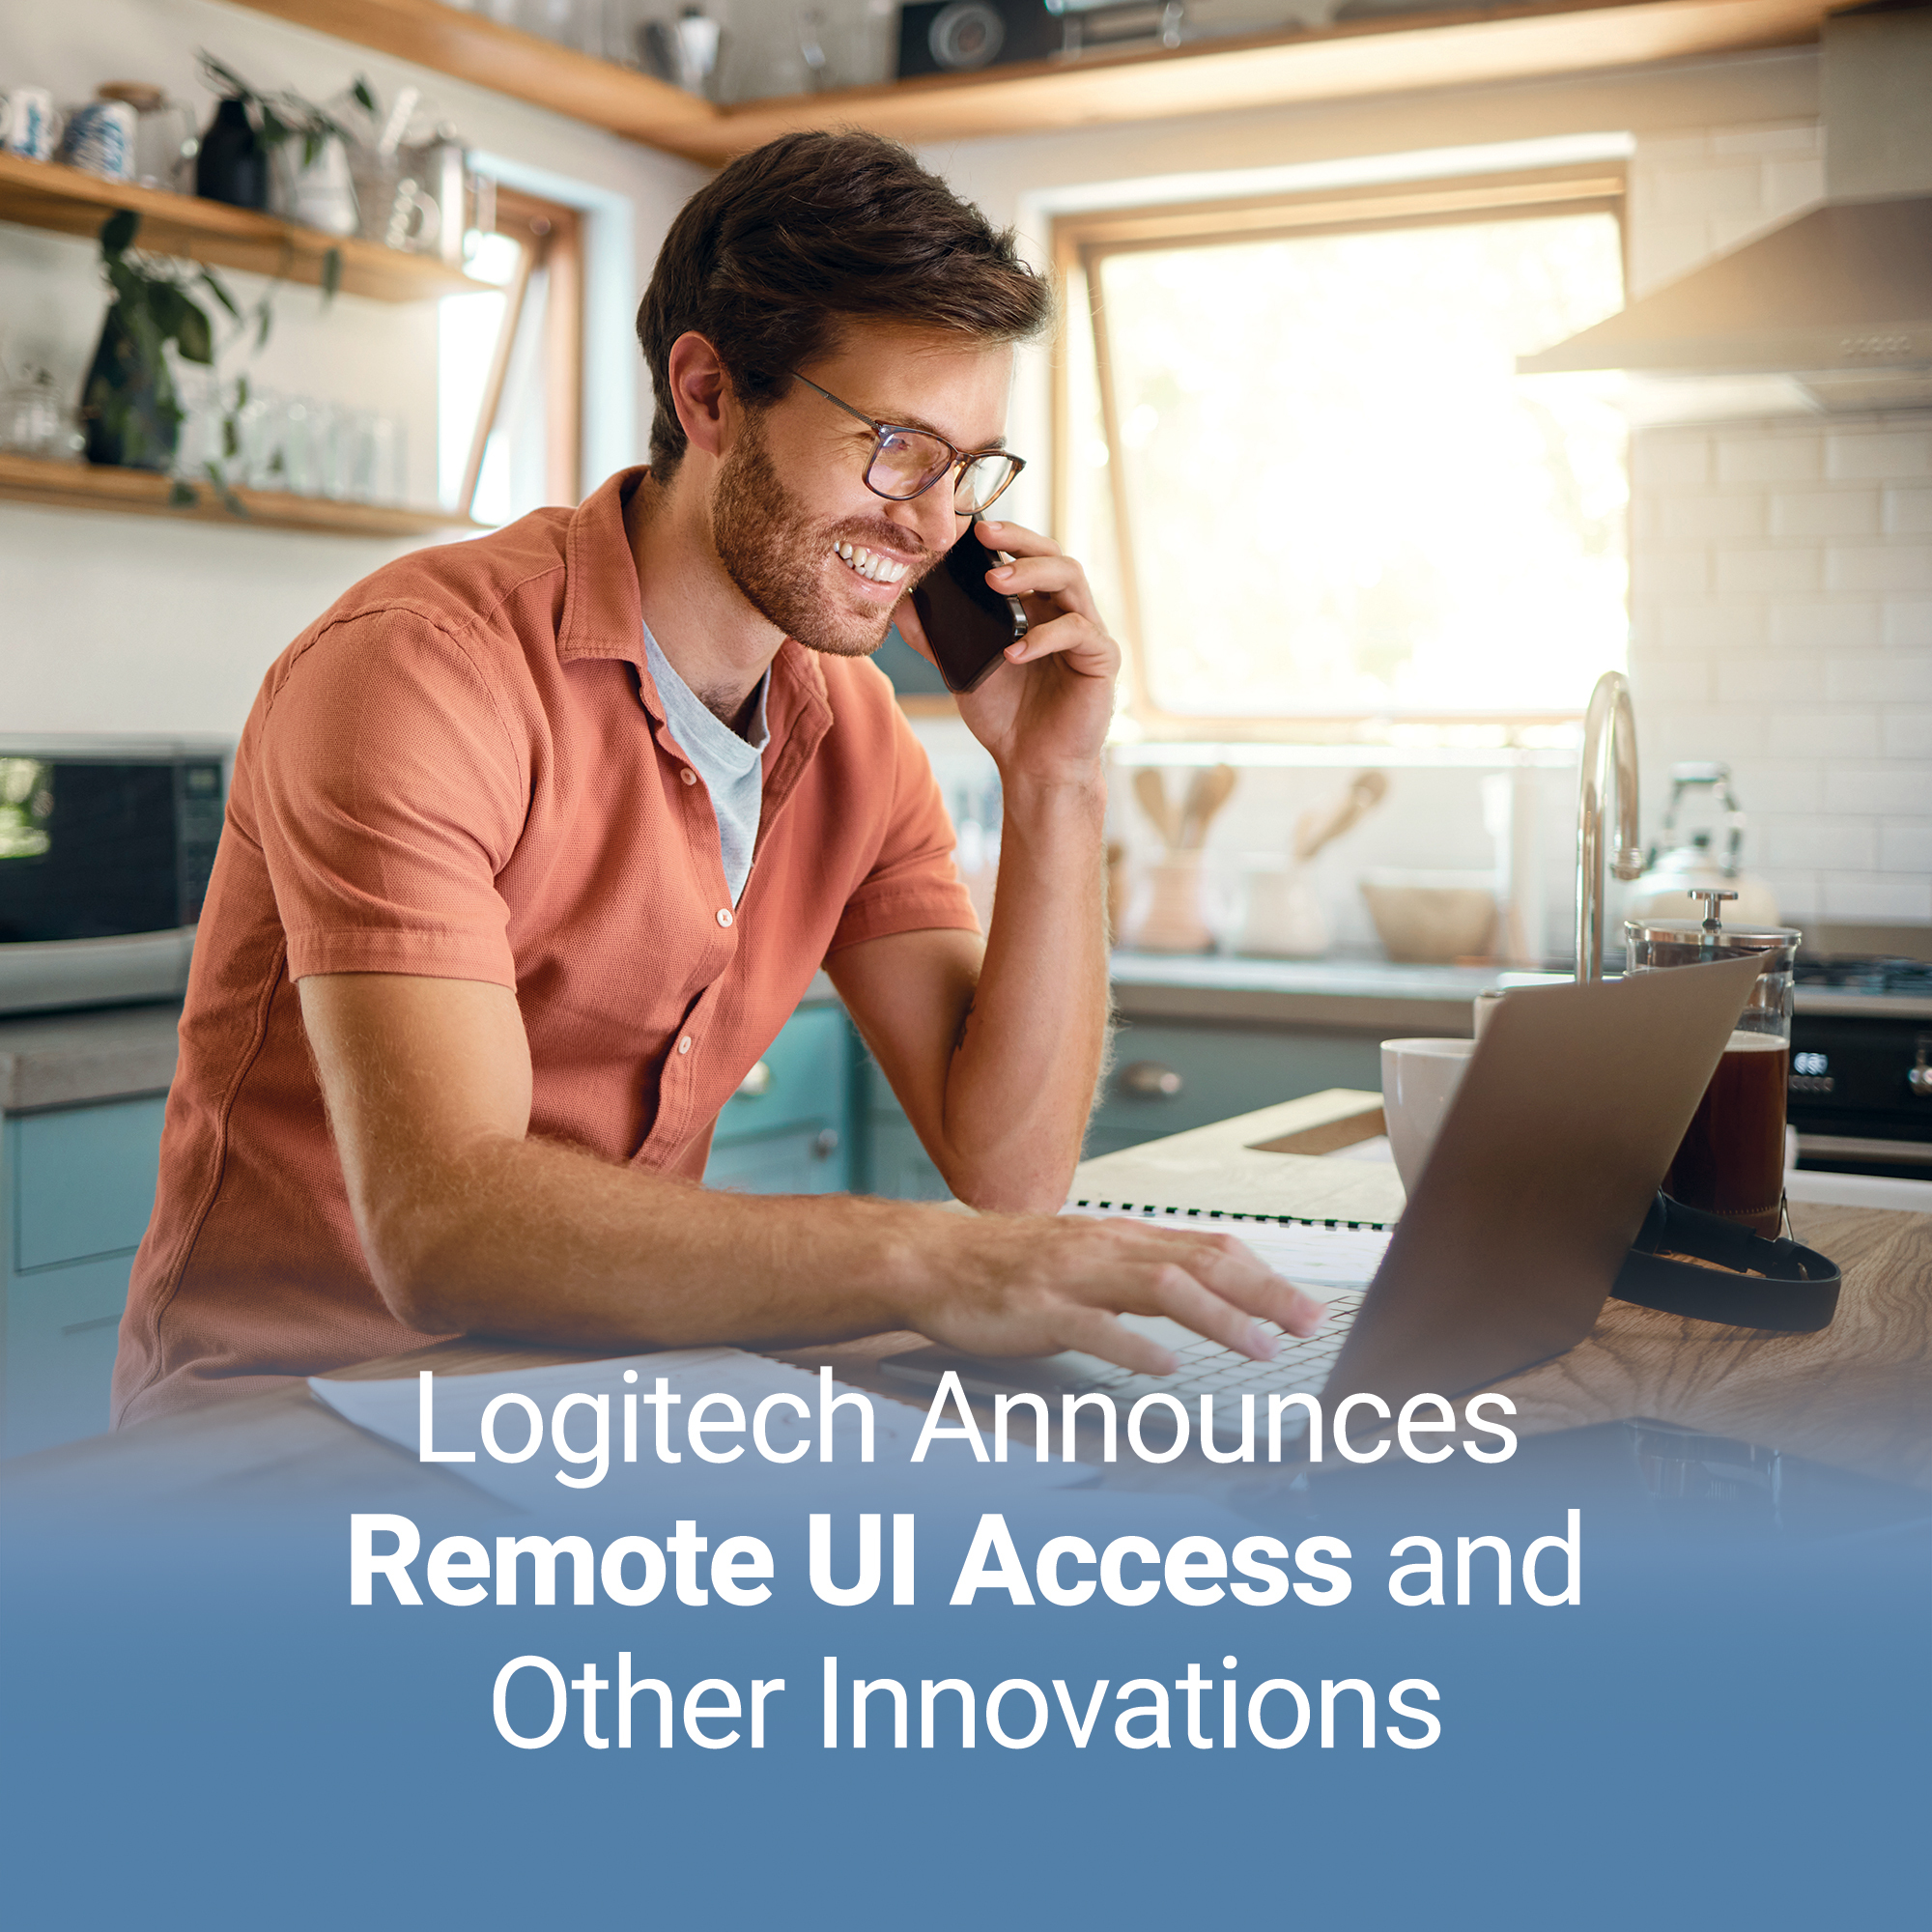 Logitech Announces Remote UI Access and Other Innovations